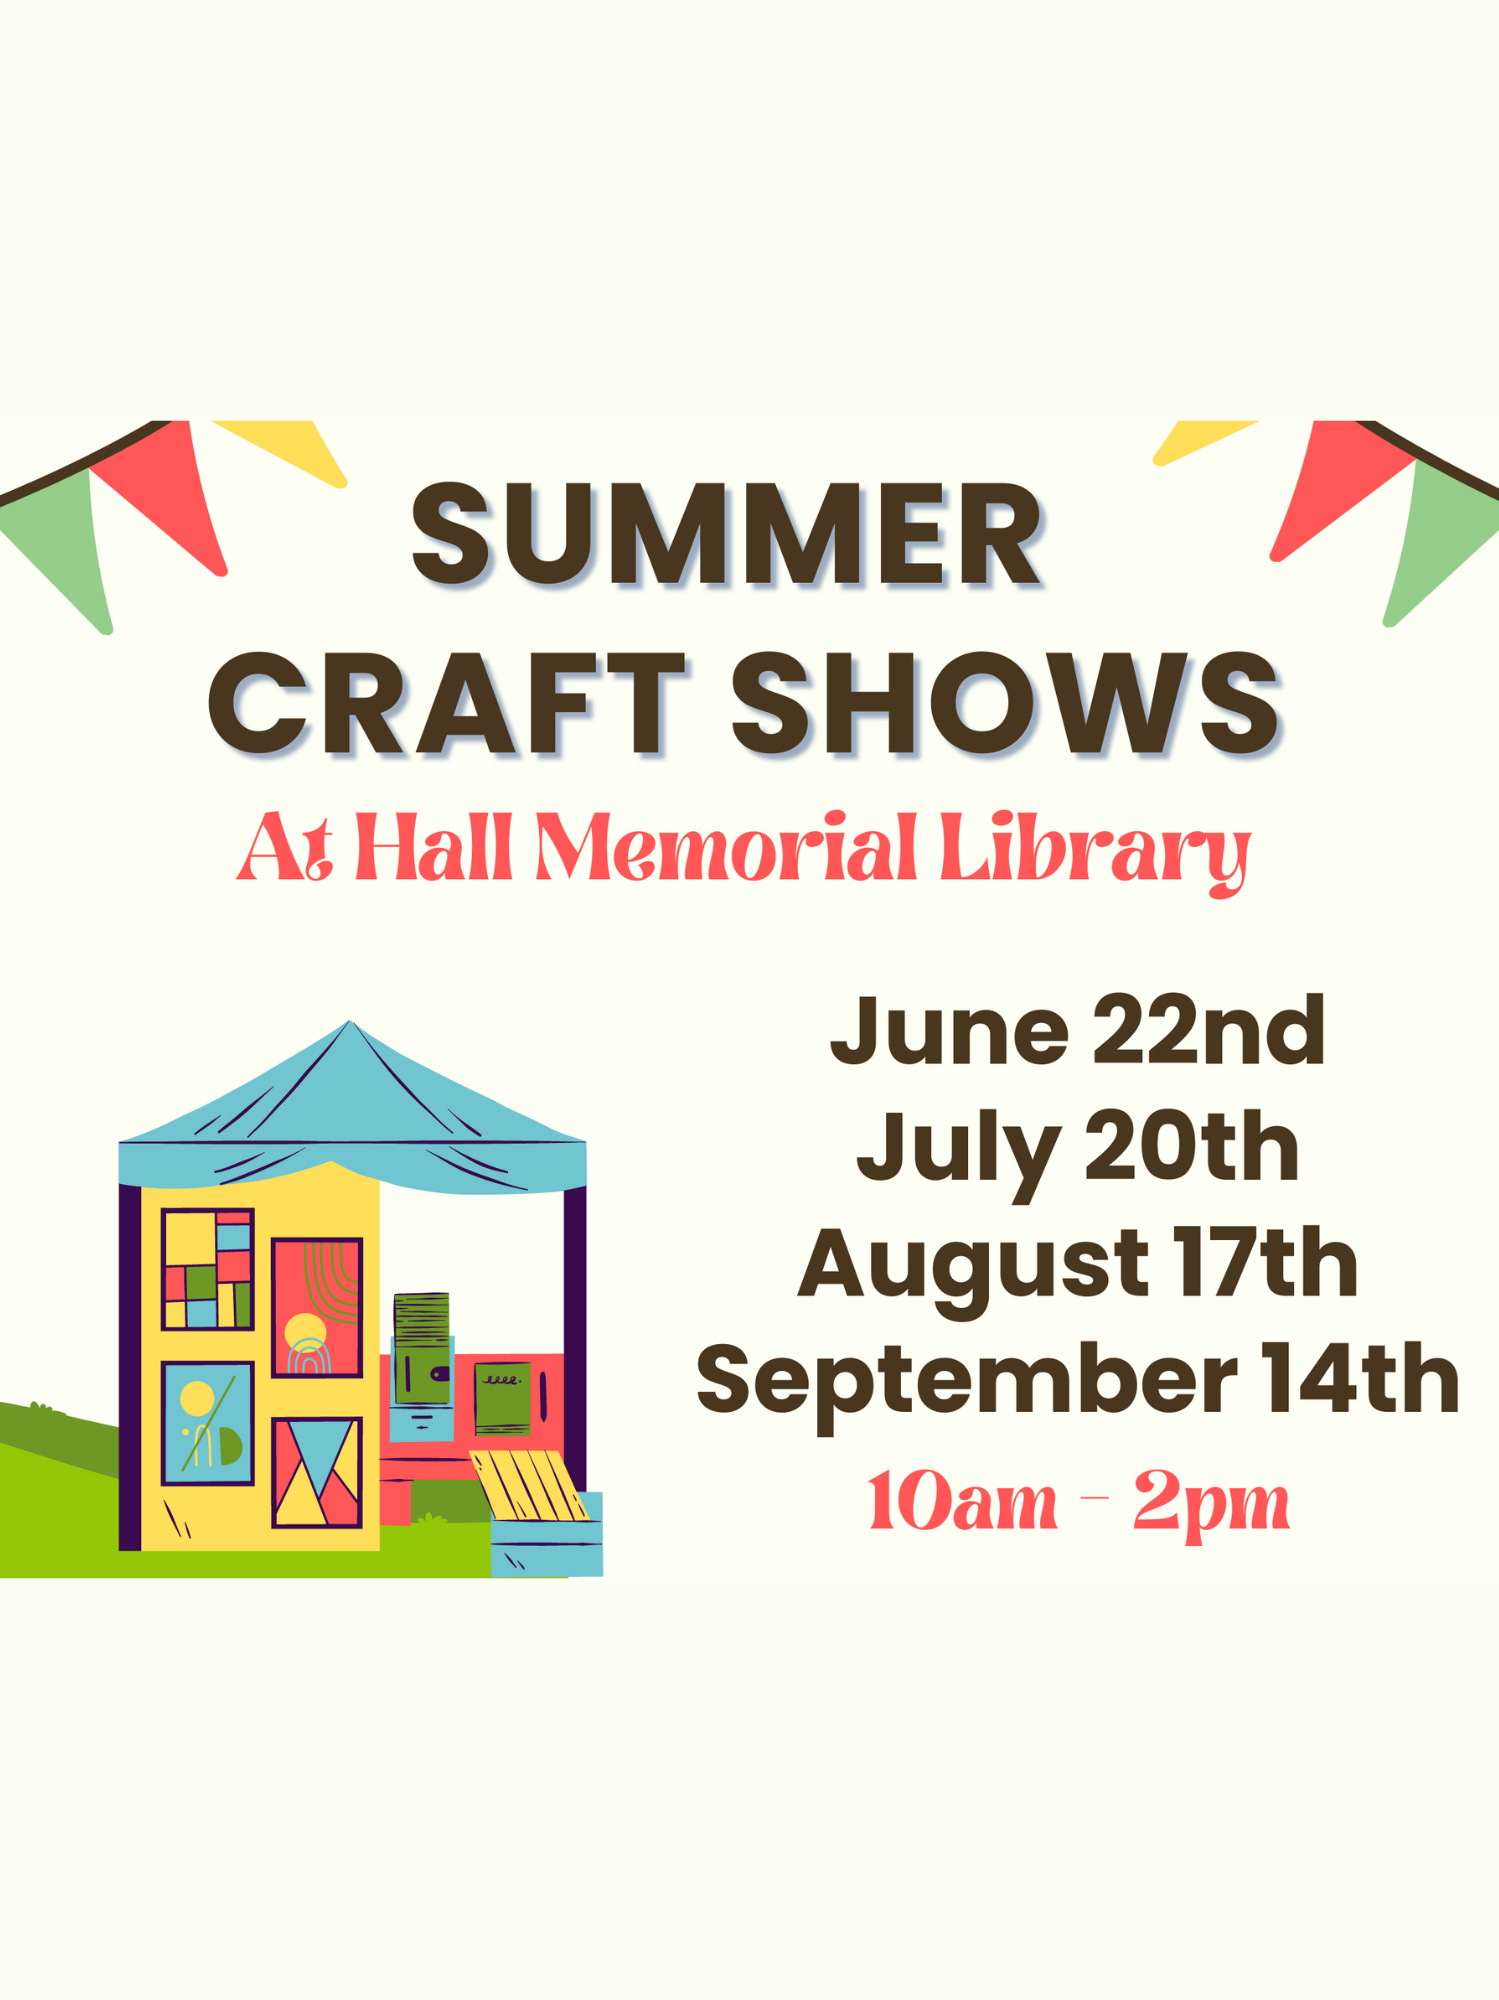 Summer Craft Shows at Hall Memorial Library. June 22nd, July 20th, August 17th, September 14th. 10am to 2pm. 